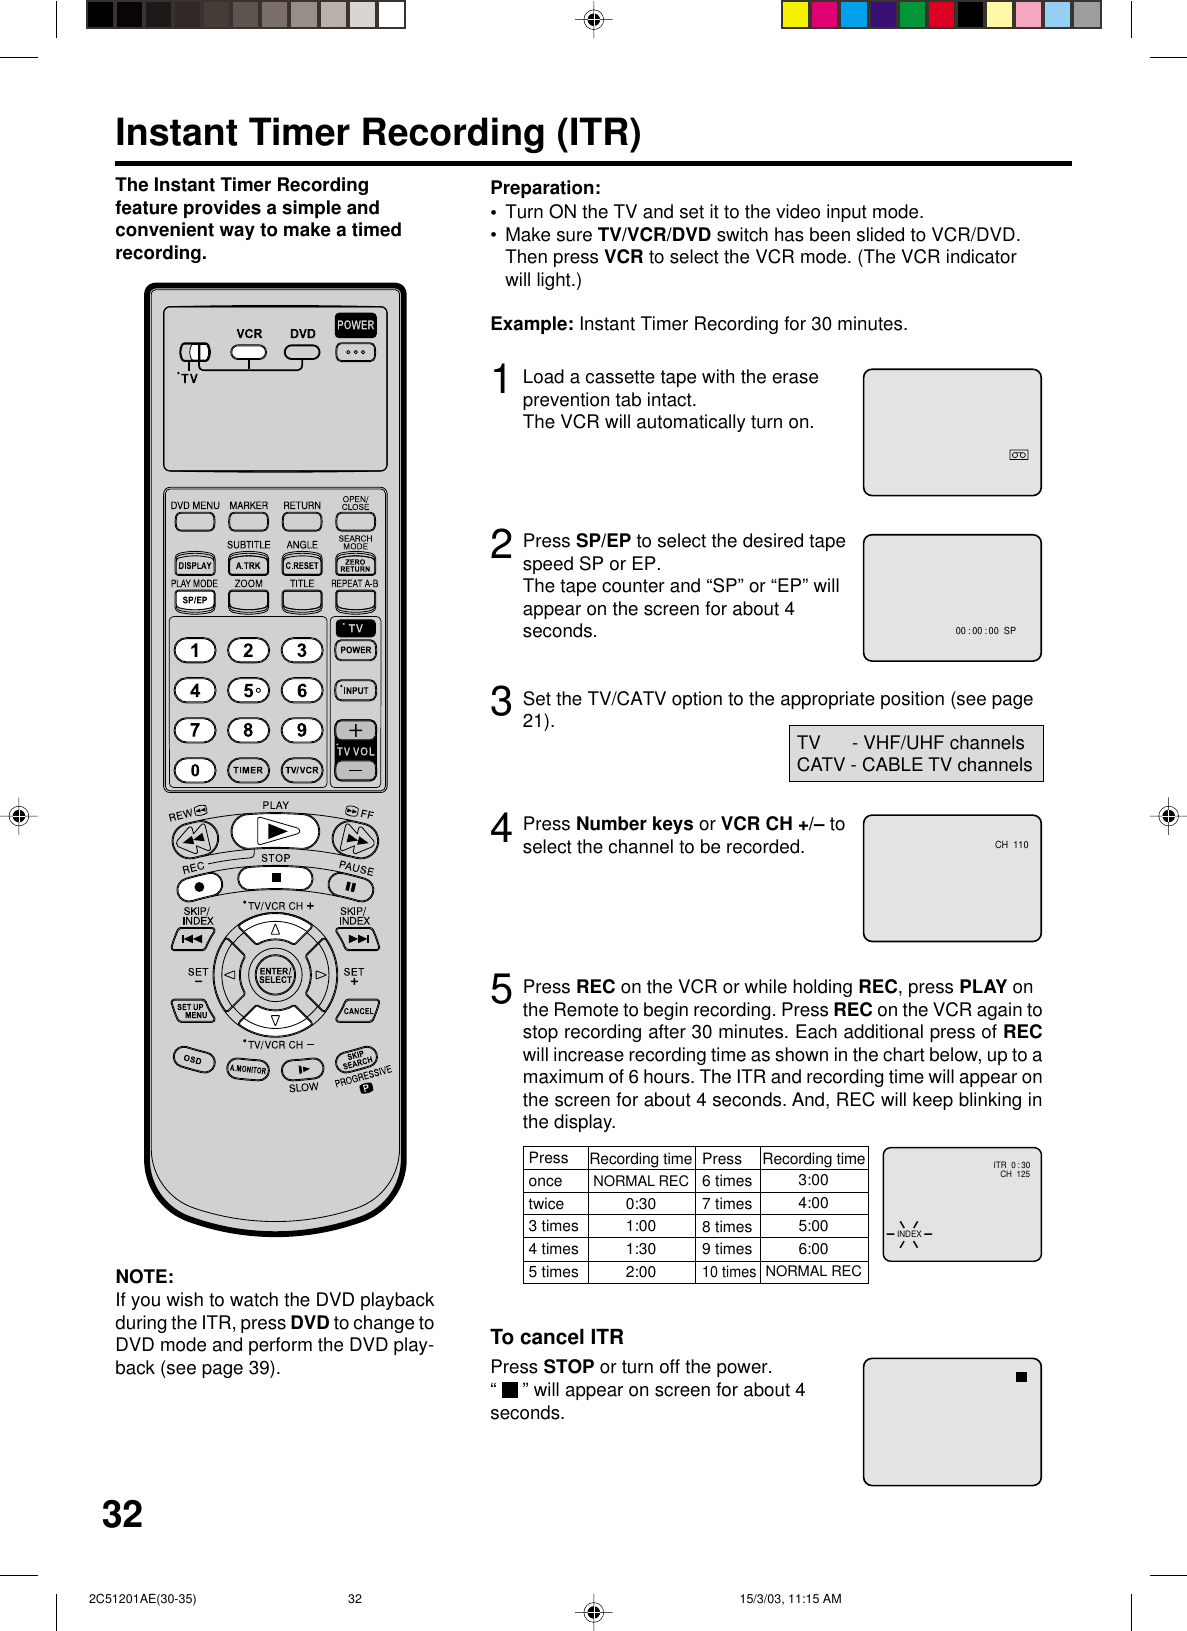 323Instant Timer Recording (ITR)Load a cassette tape with the eraseprevention tab intact.The VCR will automatically turn on.Set the TV/CATV option to the appropriate position (see page21).12Press SP/EP to select the desired tapespeed SP or EP.The tape counter and “SP” or “EP” willappear on the screen for about 4seconds.4TV      - VHF/UHF channelsCATV - CABLE TV channelsThe Instant Timer Recordingfeature provides a simple andconvenient way to make a timedrecording.Press Number keys or VCR CH +/– toselect the channel to be recorded.5NOTE:If you wish to watch the DVD playbackduring the ITR, press DVD to change toDVD mode and perform the DVD play-back (see page 39).Example: Instant Timer Recording for 30 minutes.Press REC on the VCR or while holding REC, press PLAY onthe Remote to begin recording. Press REC on the VCR again tostop recording after 30 minutes. Each additional press of RECwill increase recording time as shown in the chart below, up to amaximum of 6 hours. The ITR and recording time will appear onthe screen for about 4 seconds. And, REC will keep blinking inthe display.Press STOP or turn off the power.“  ” will appear on screen for about 4seconds.To cancel ITRPressoncetwice3 times4 times5 timesNORMAL REC0:301:001:302:003:004:005:006:00NORMAL RECRecording time Press6 times7 times8 times9 times10 timesRecording timeTurn ON the TV and set it to the video input mode.Make sure TV/VCR/DVD switch has been slided to VCR/DVD.Then press VCR to select the VCR mode. (The VCR indicatorwill light.)Preparation:••CH  110CH  125INDEXITR  0 : 3000 : 00 : 00  SP 2C51201AE(30-35) 15/3/03, 11:15 AM32